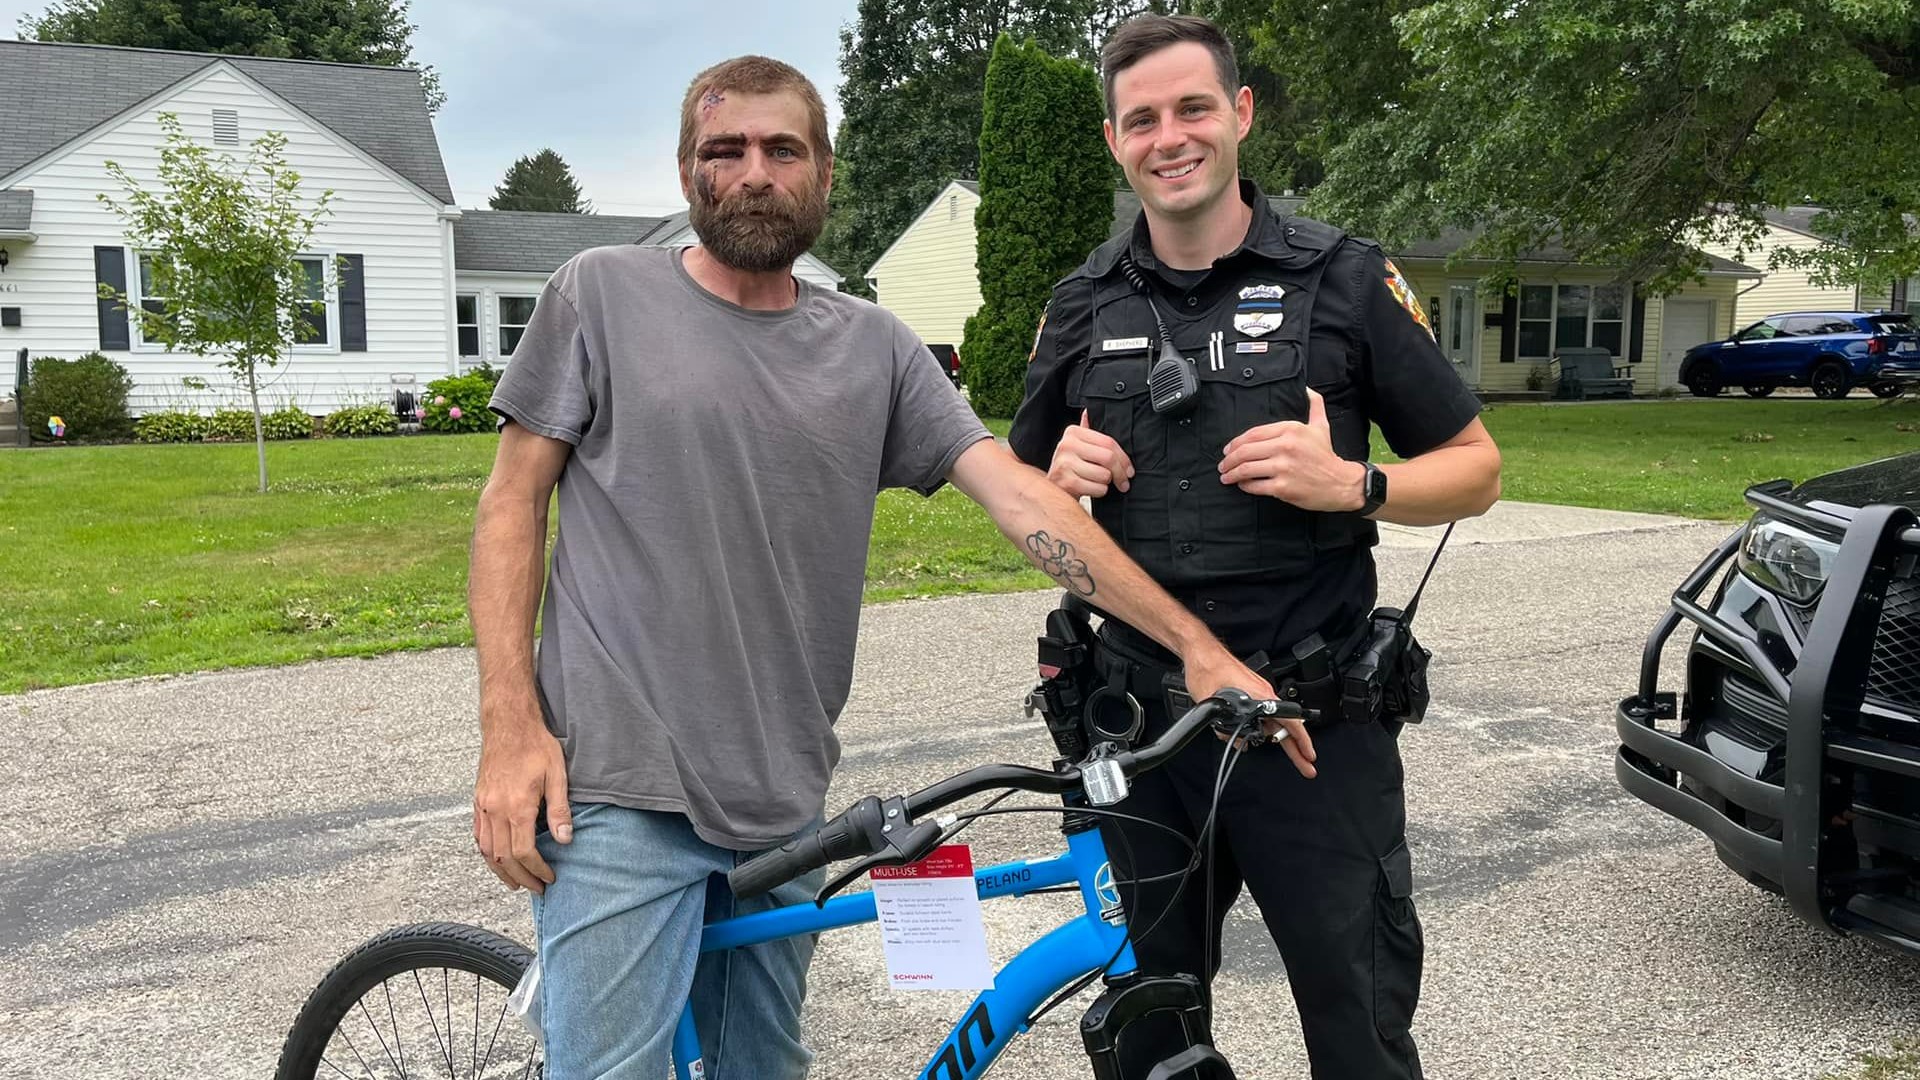 Adam Wimer thought police were stopping by for another interview when one officer decided to replace his bike after the crash.